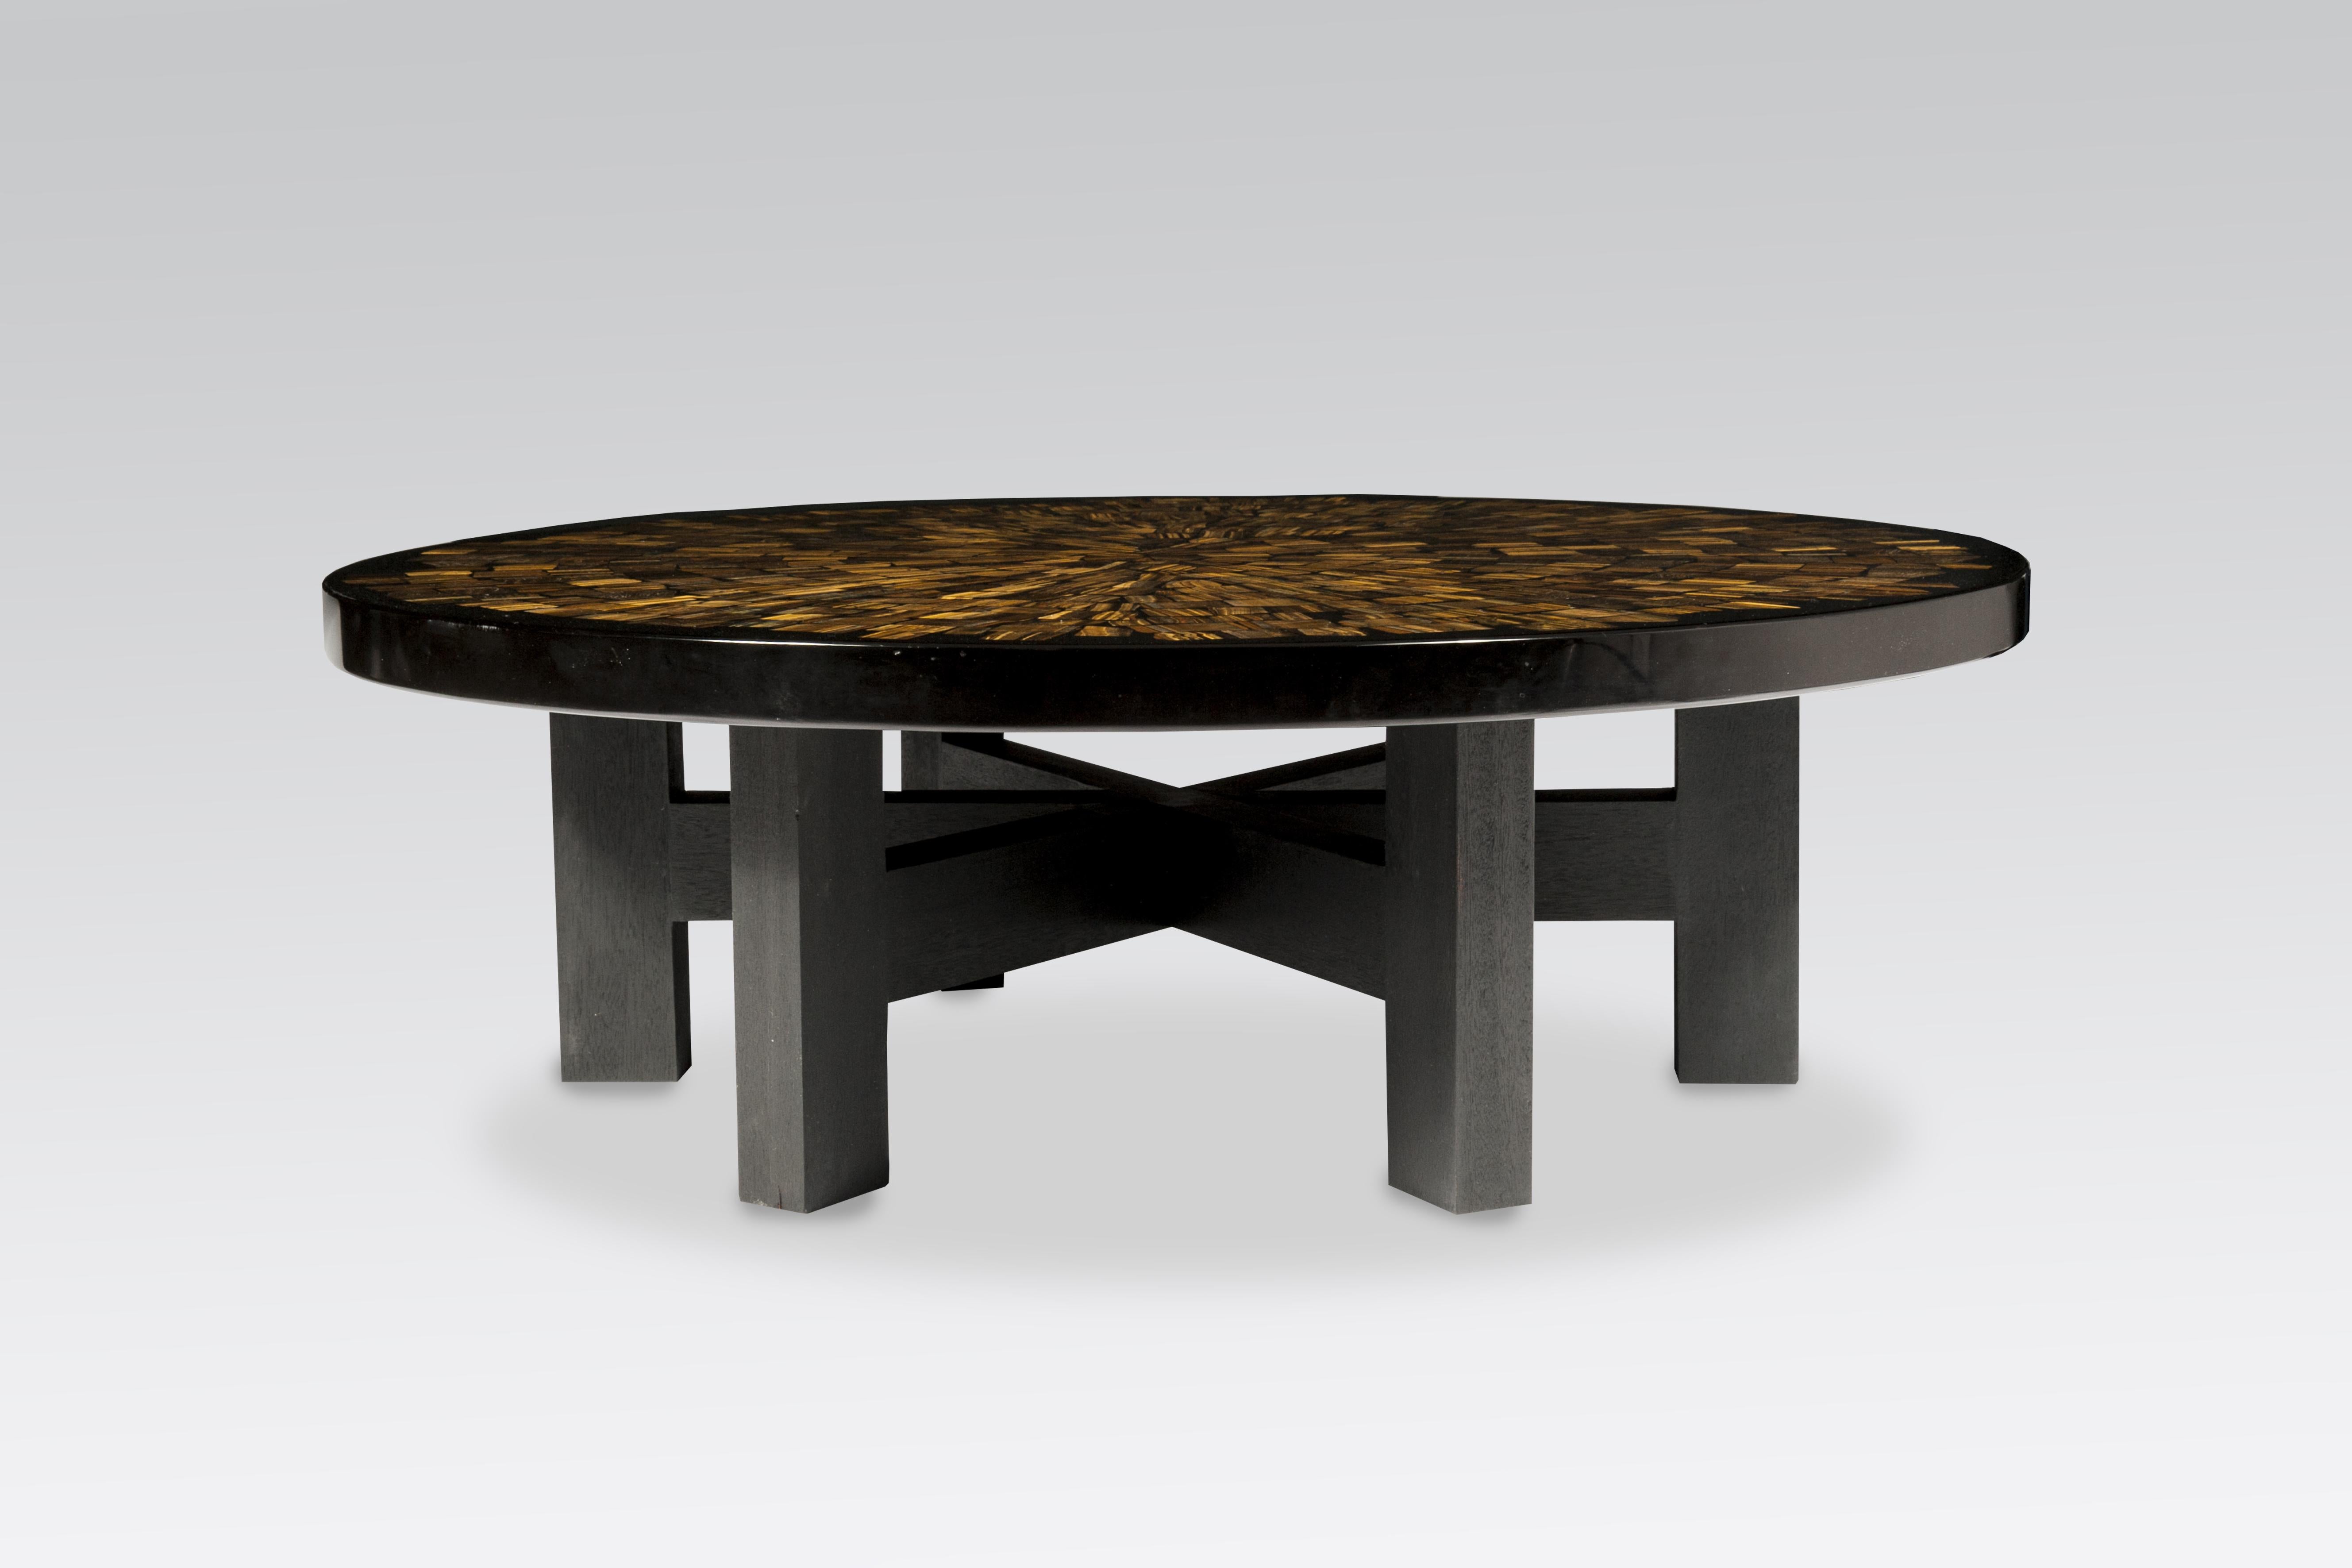 This coffee table by Etienne Allemeersch, an artisan who worked in the workshop of Ado Chale, is executed circular coffee table in resin with an inlay of tiger eye wood. The piece sits on a wood black base and was produced in Belgium during the